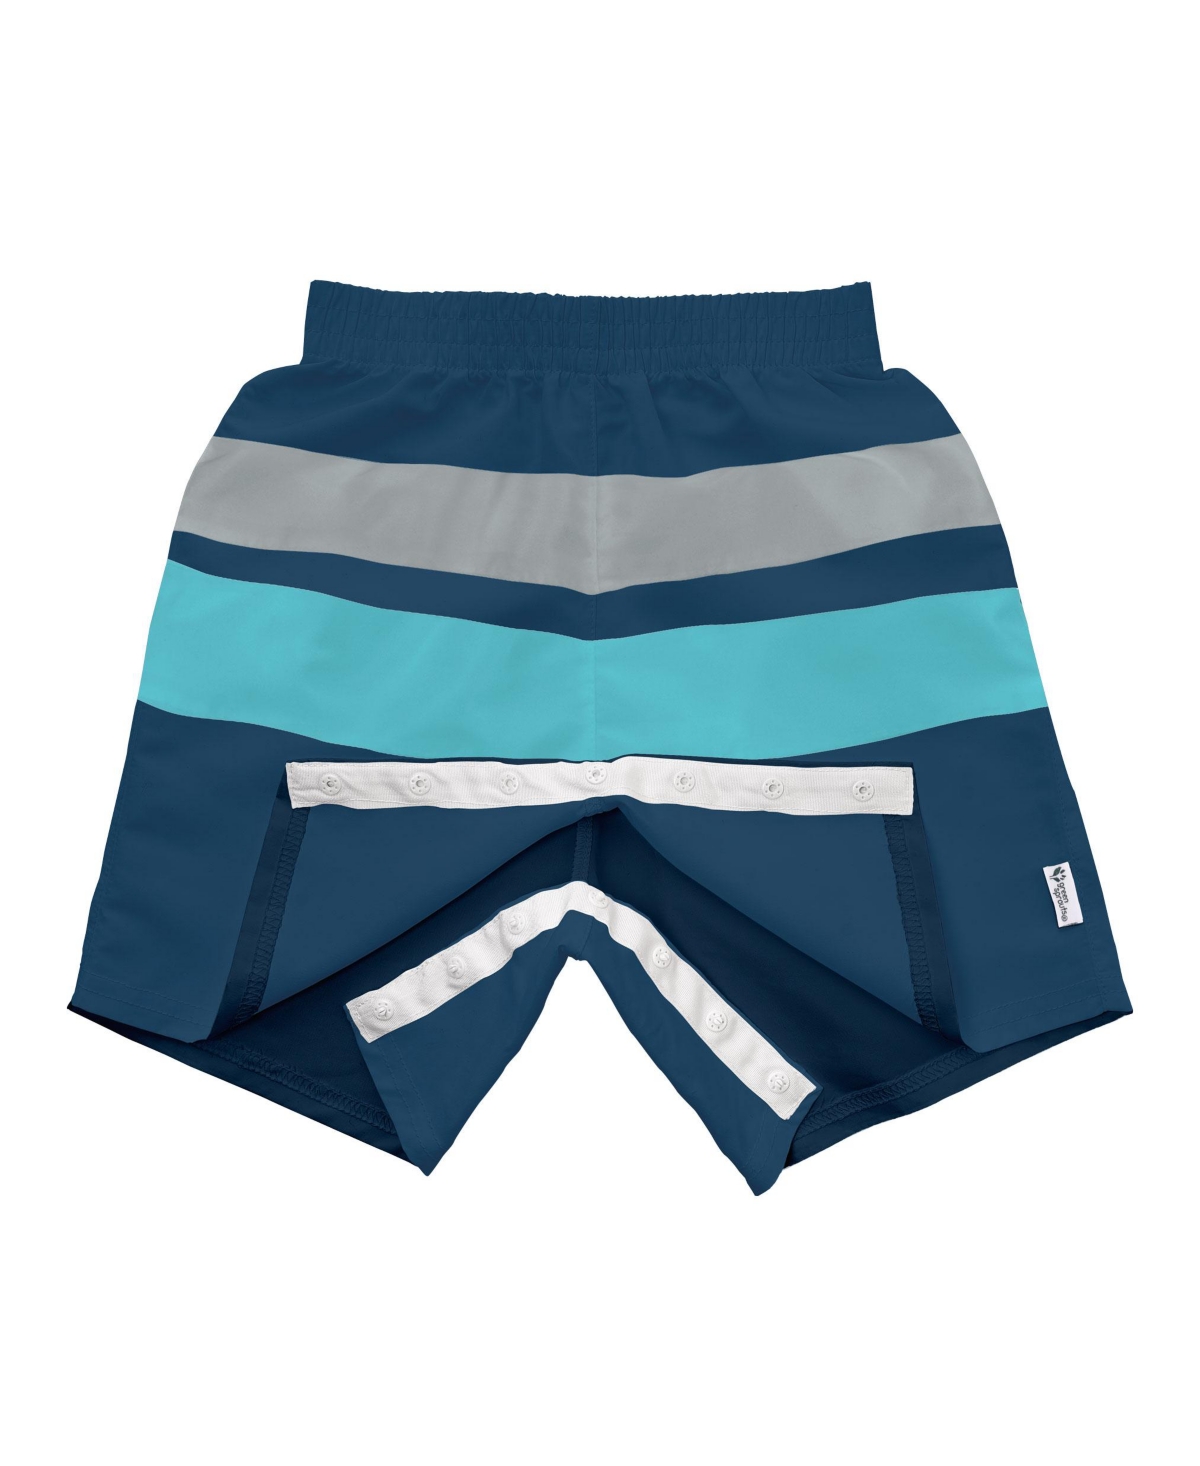 Green Sprouts Baby Boys Lightweight Easy Change Swim Trunks In Navy Aqua Gray Colorblock